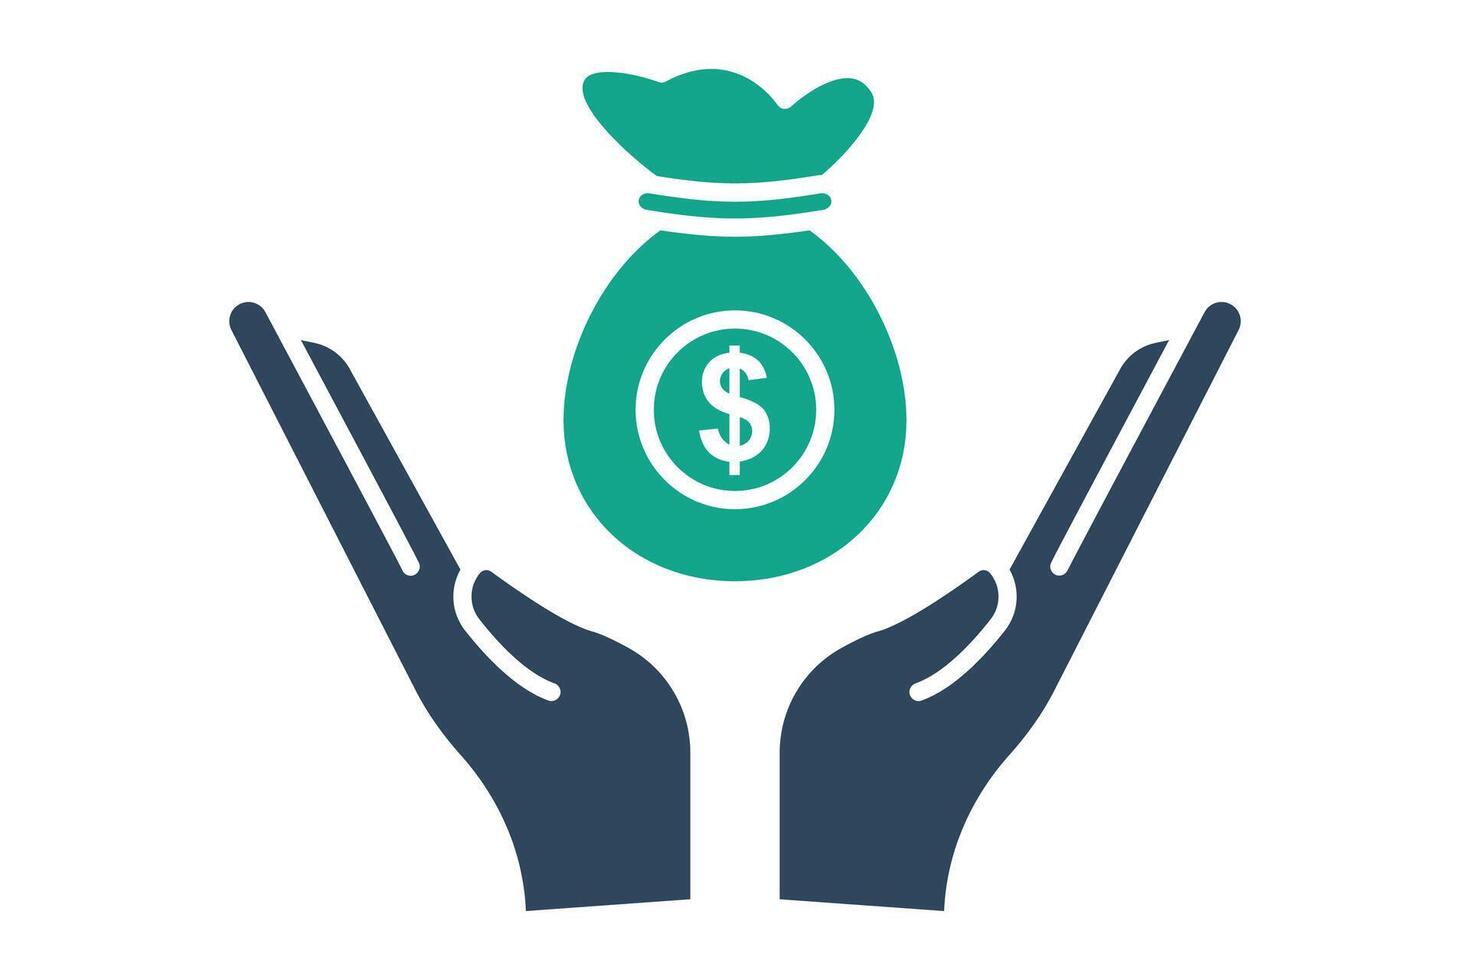 bonus icon. hand with money bag. Great for illustrating monetary bonuses, perks, and employee motivation in business contexts. solid icon style. element illustration vector